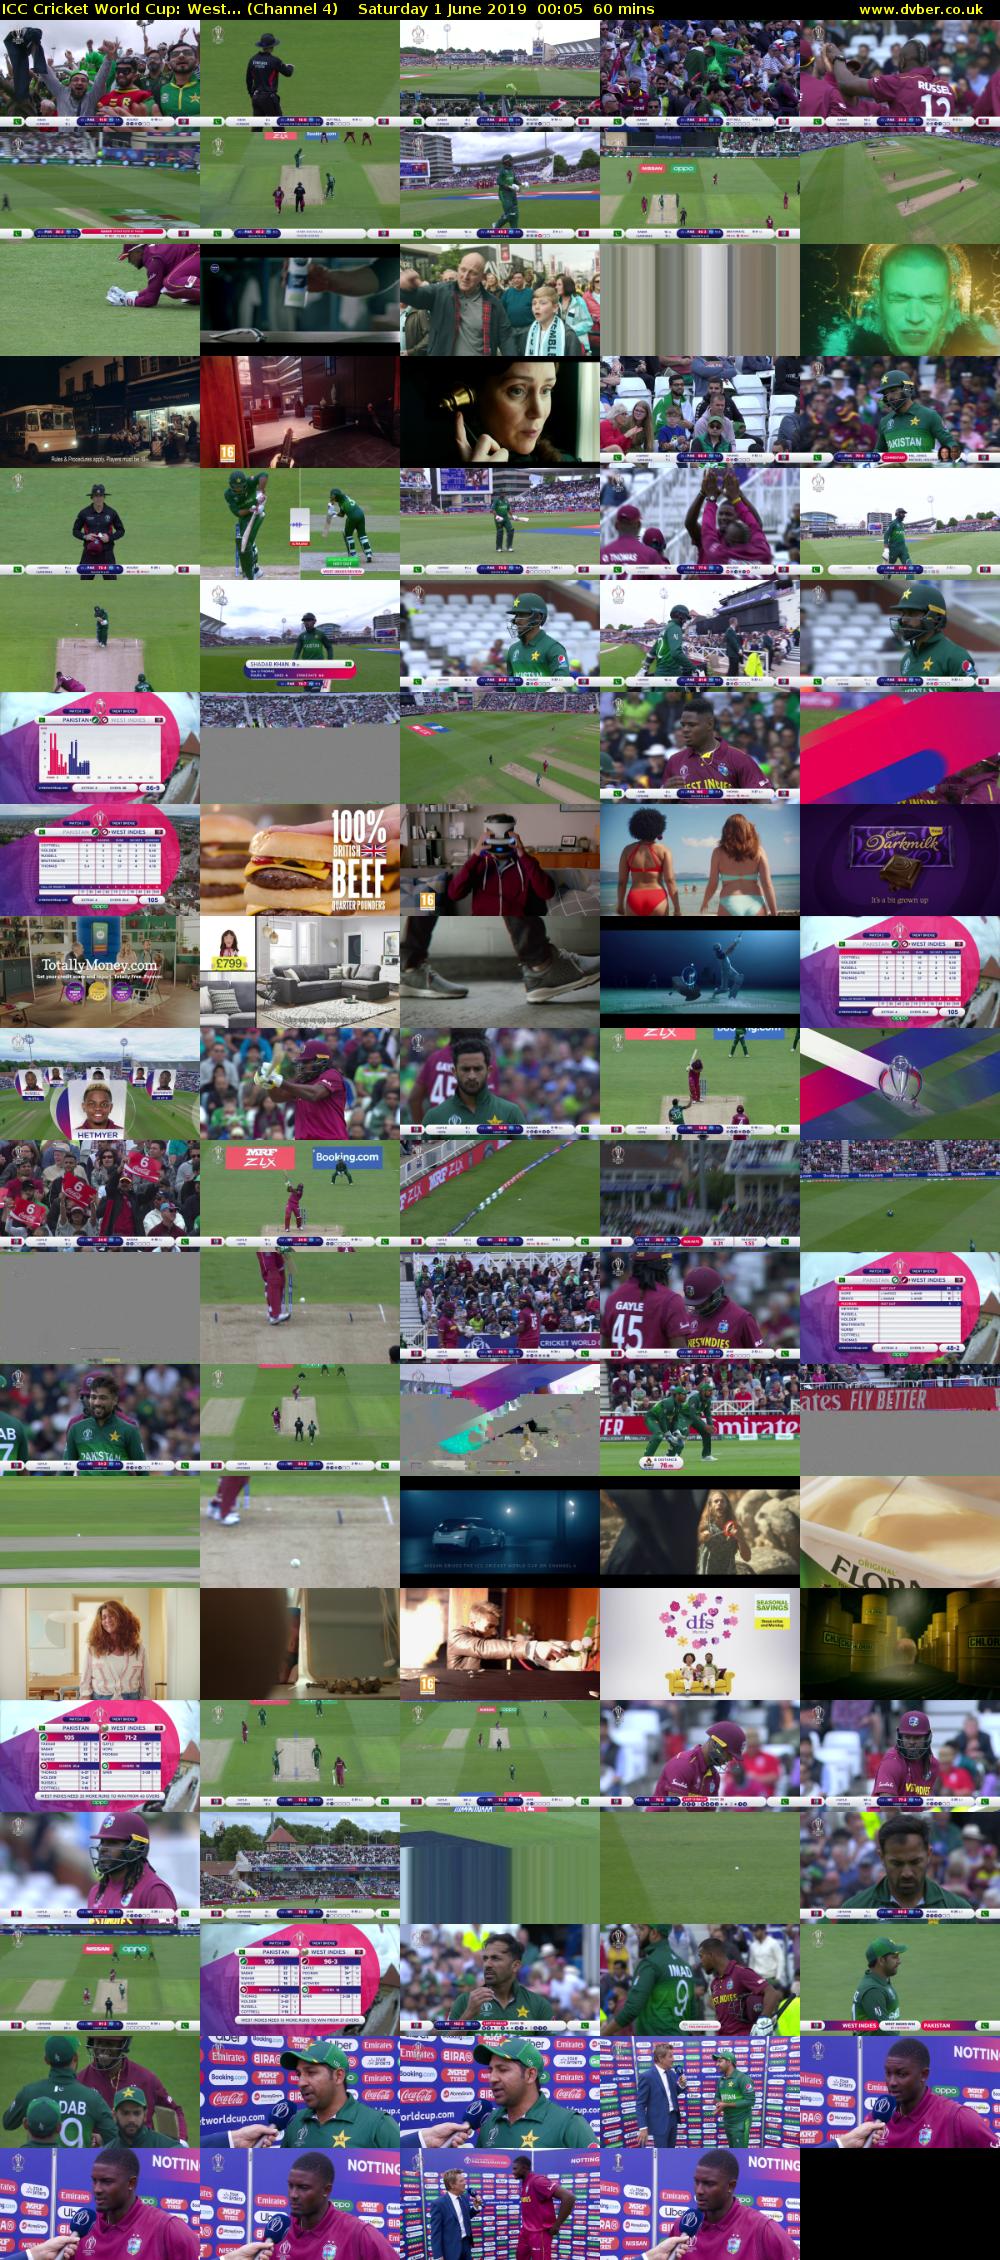 ICC Cricket World Cup: West... (Channel 4) Saturday 1 June 2019 00:05 - 01:05